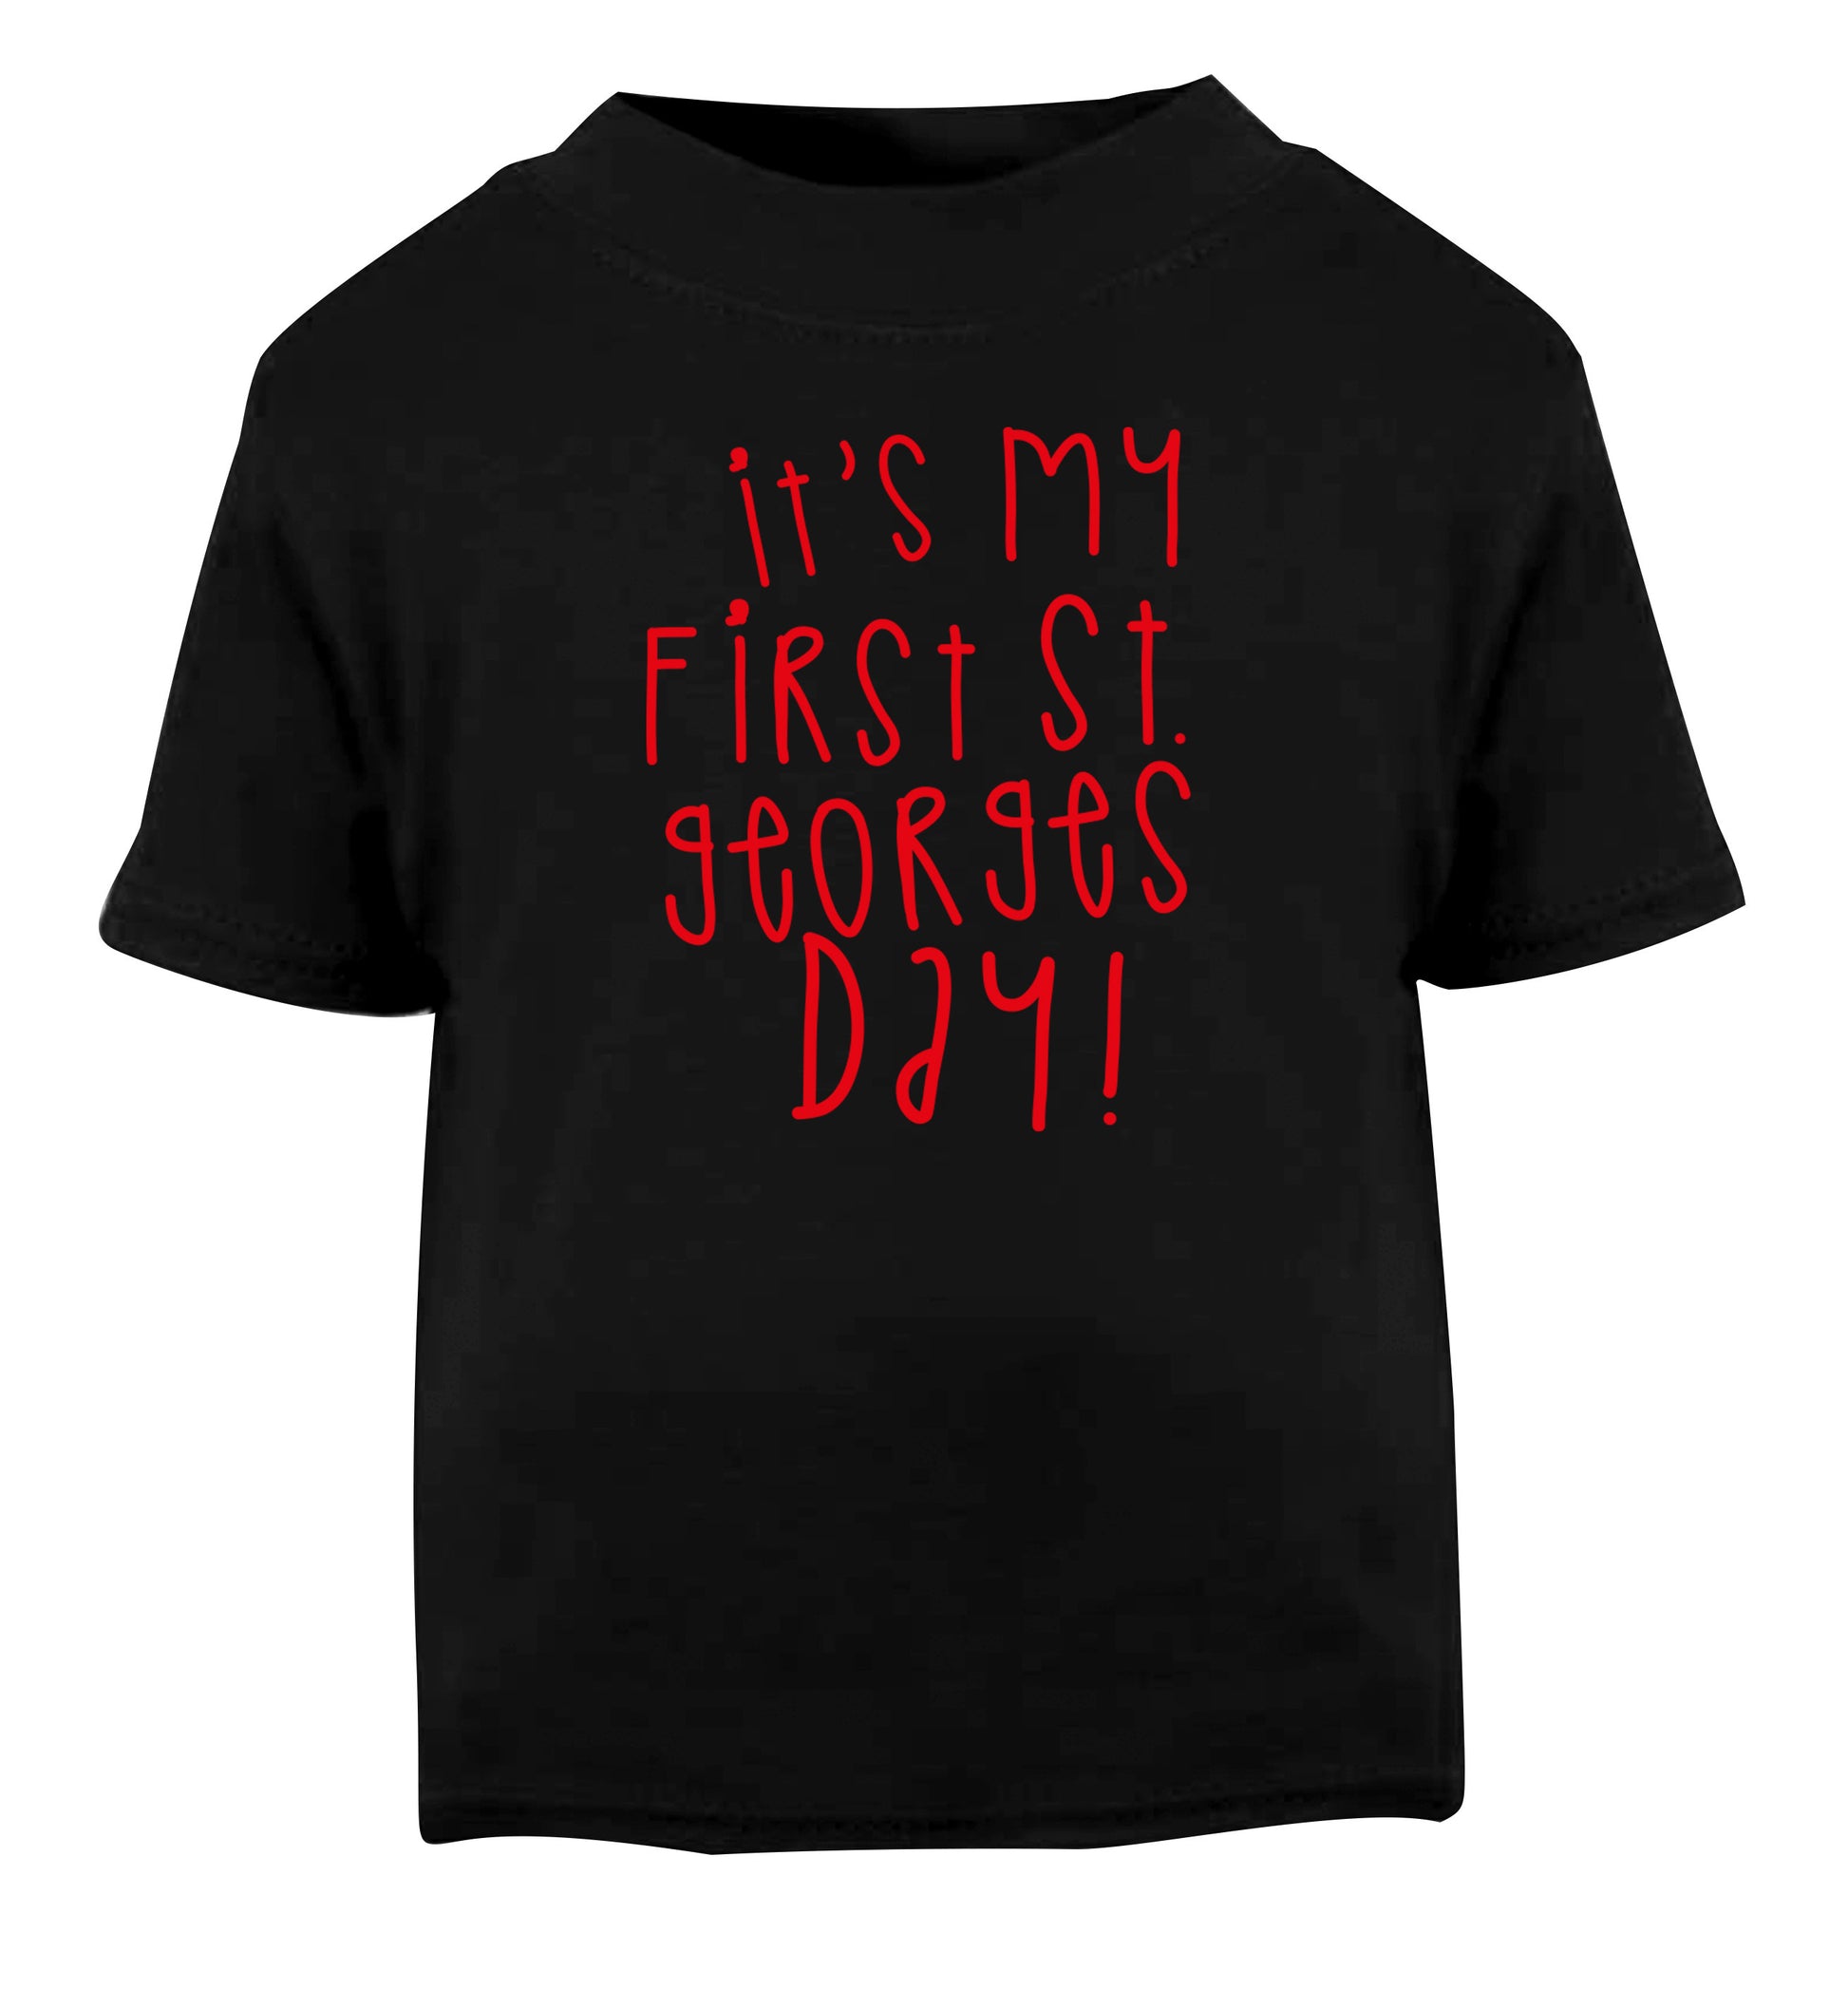 It's my first St Georges day Black Baby Toddler Tshirt 2 years